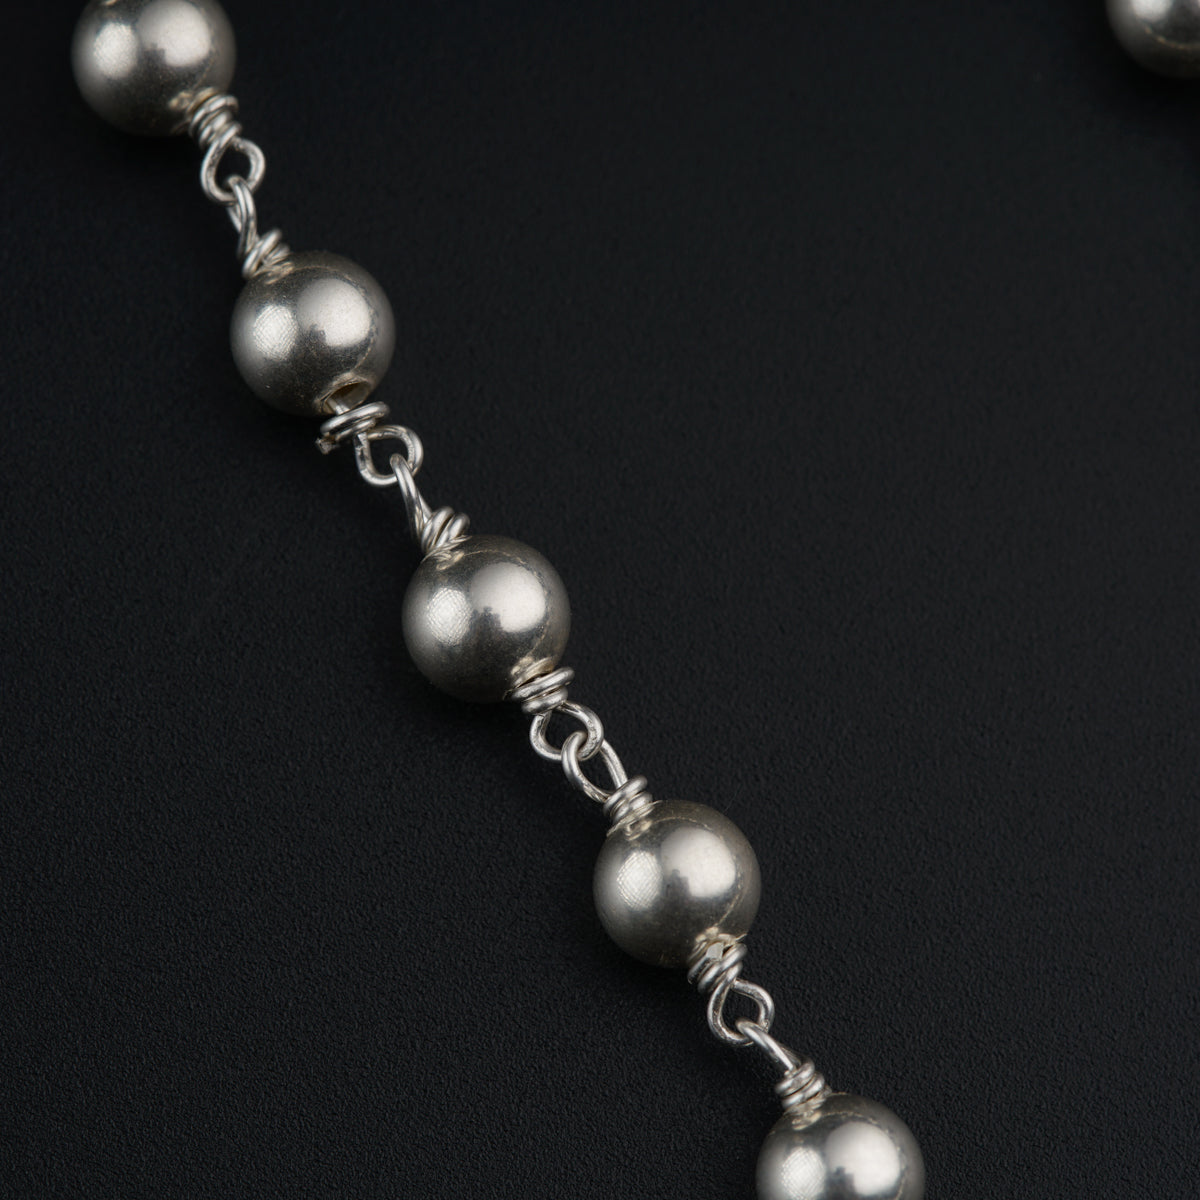 a close up of a chain with balls on it